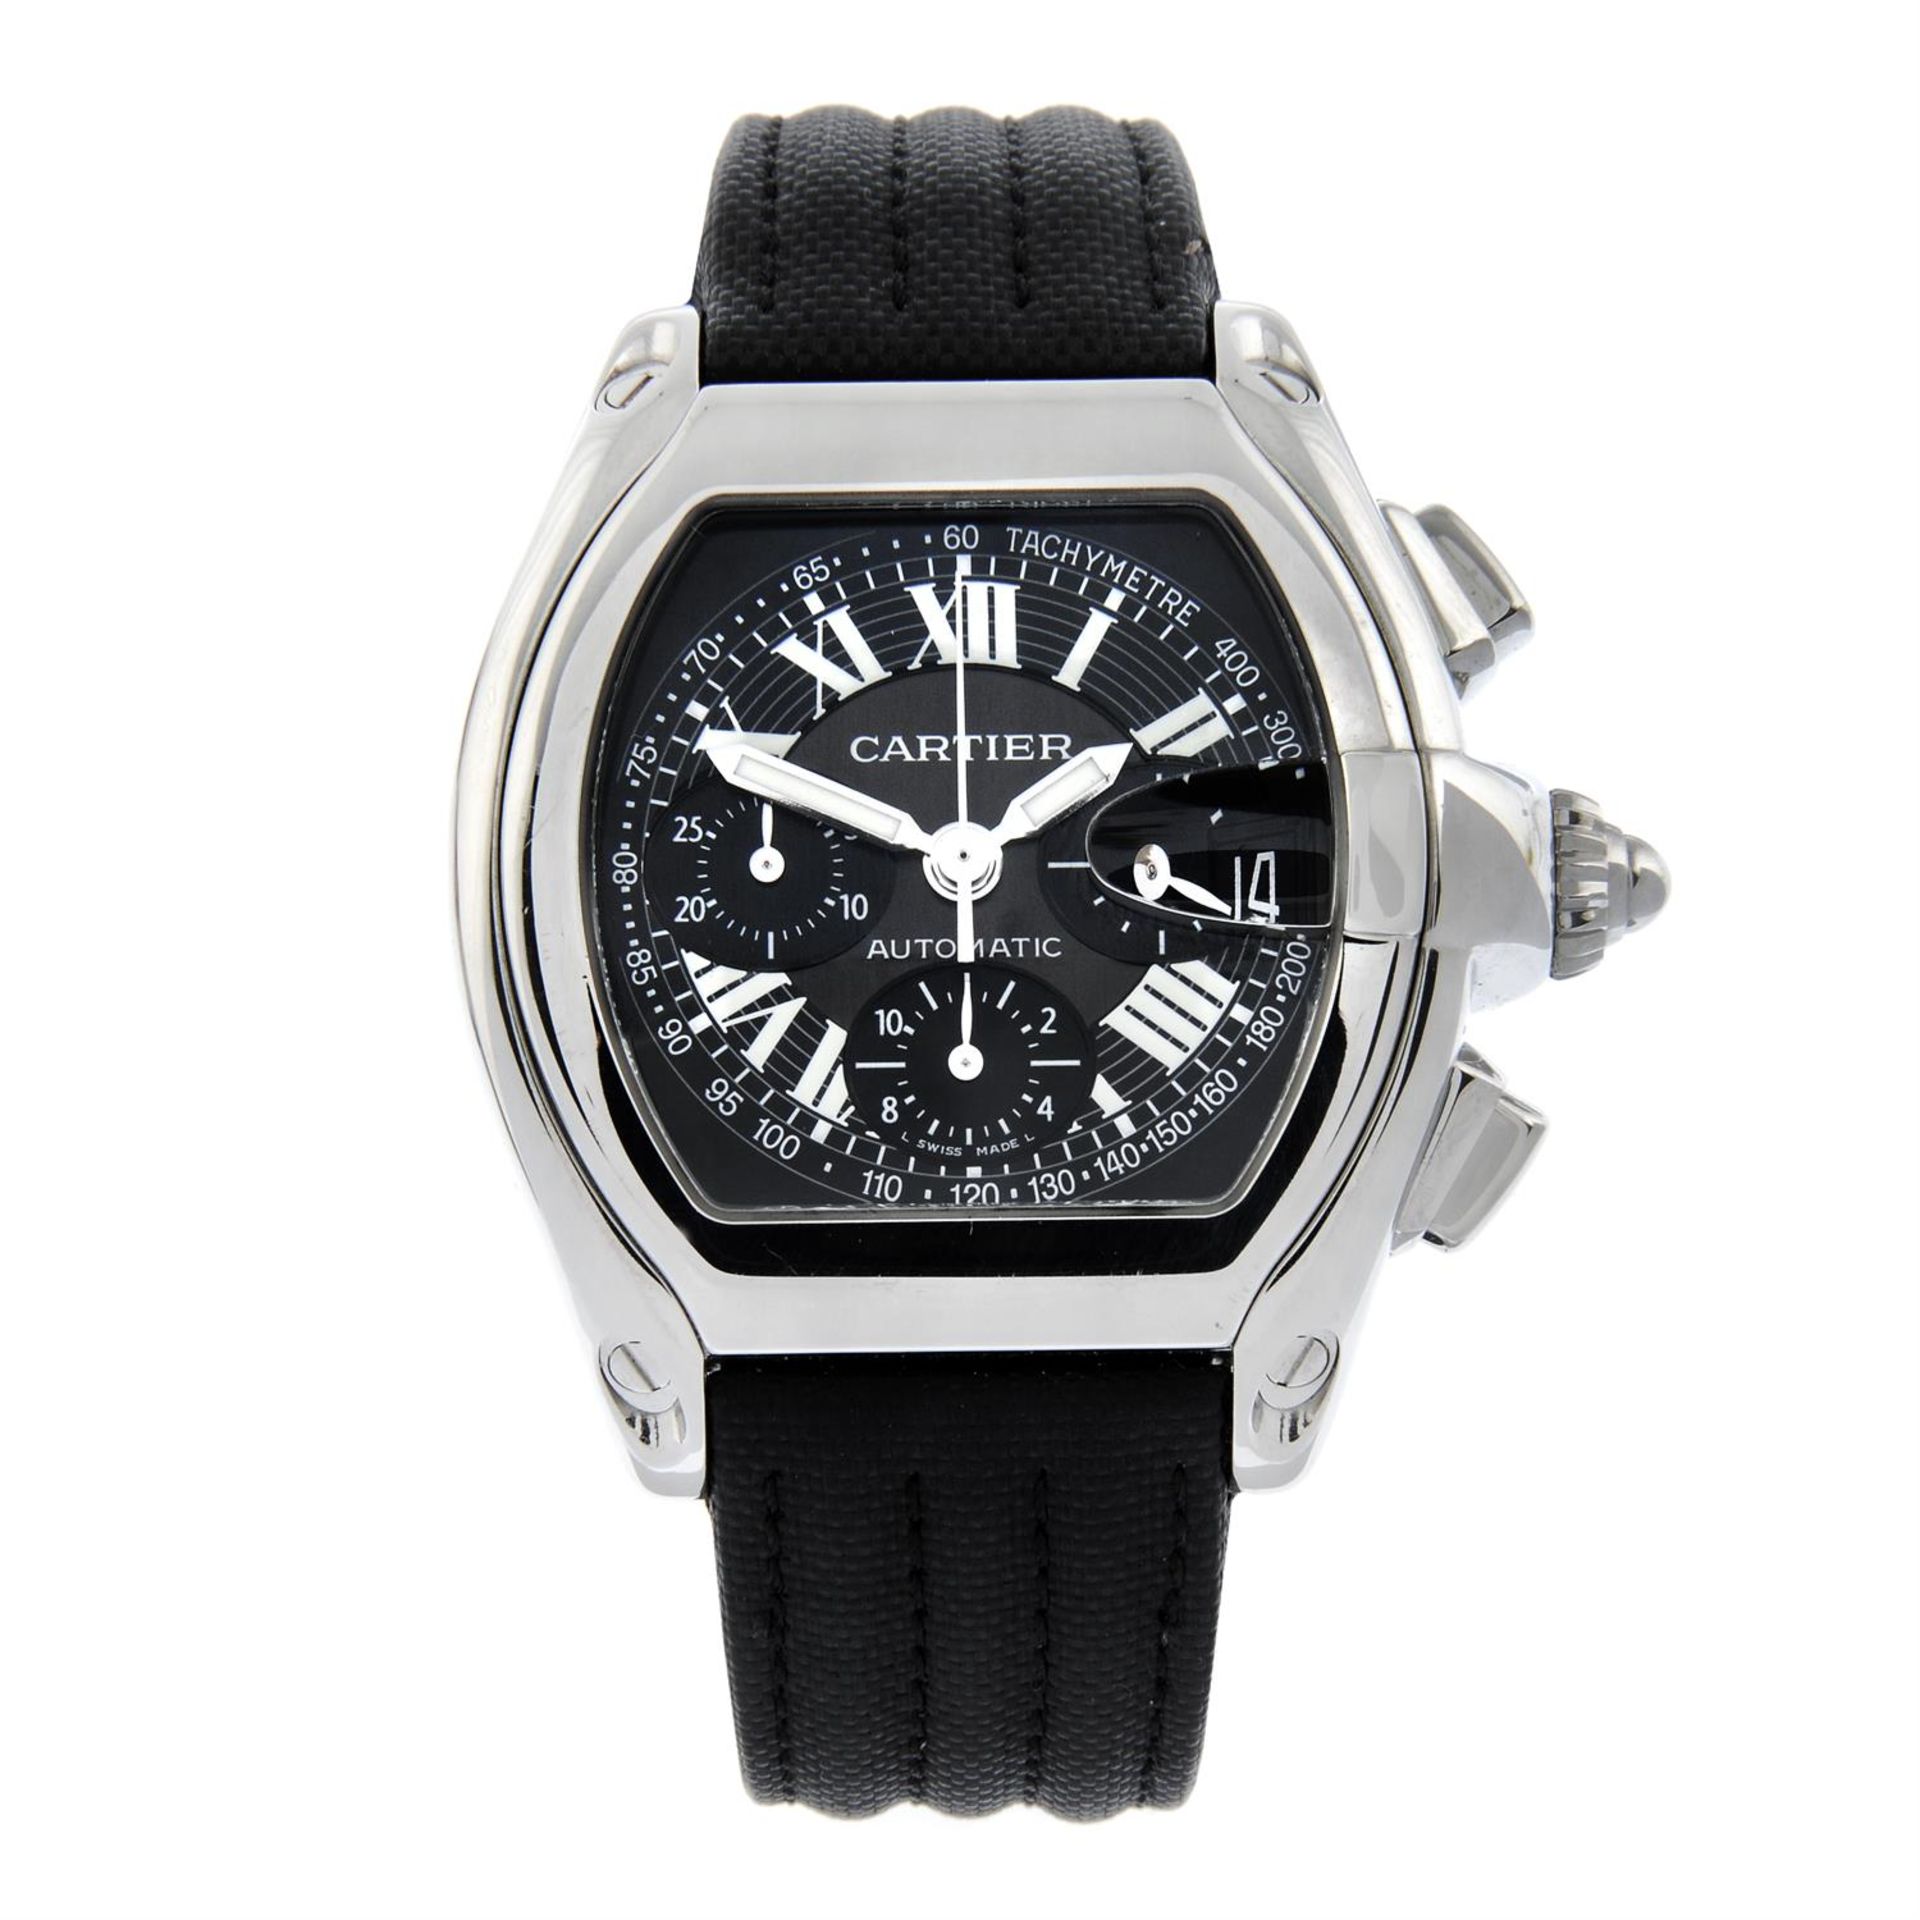 CARTIER - a stainless steel Roadster chronograph wrist watch, 40mm.